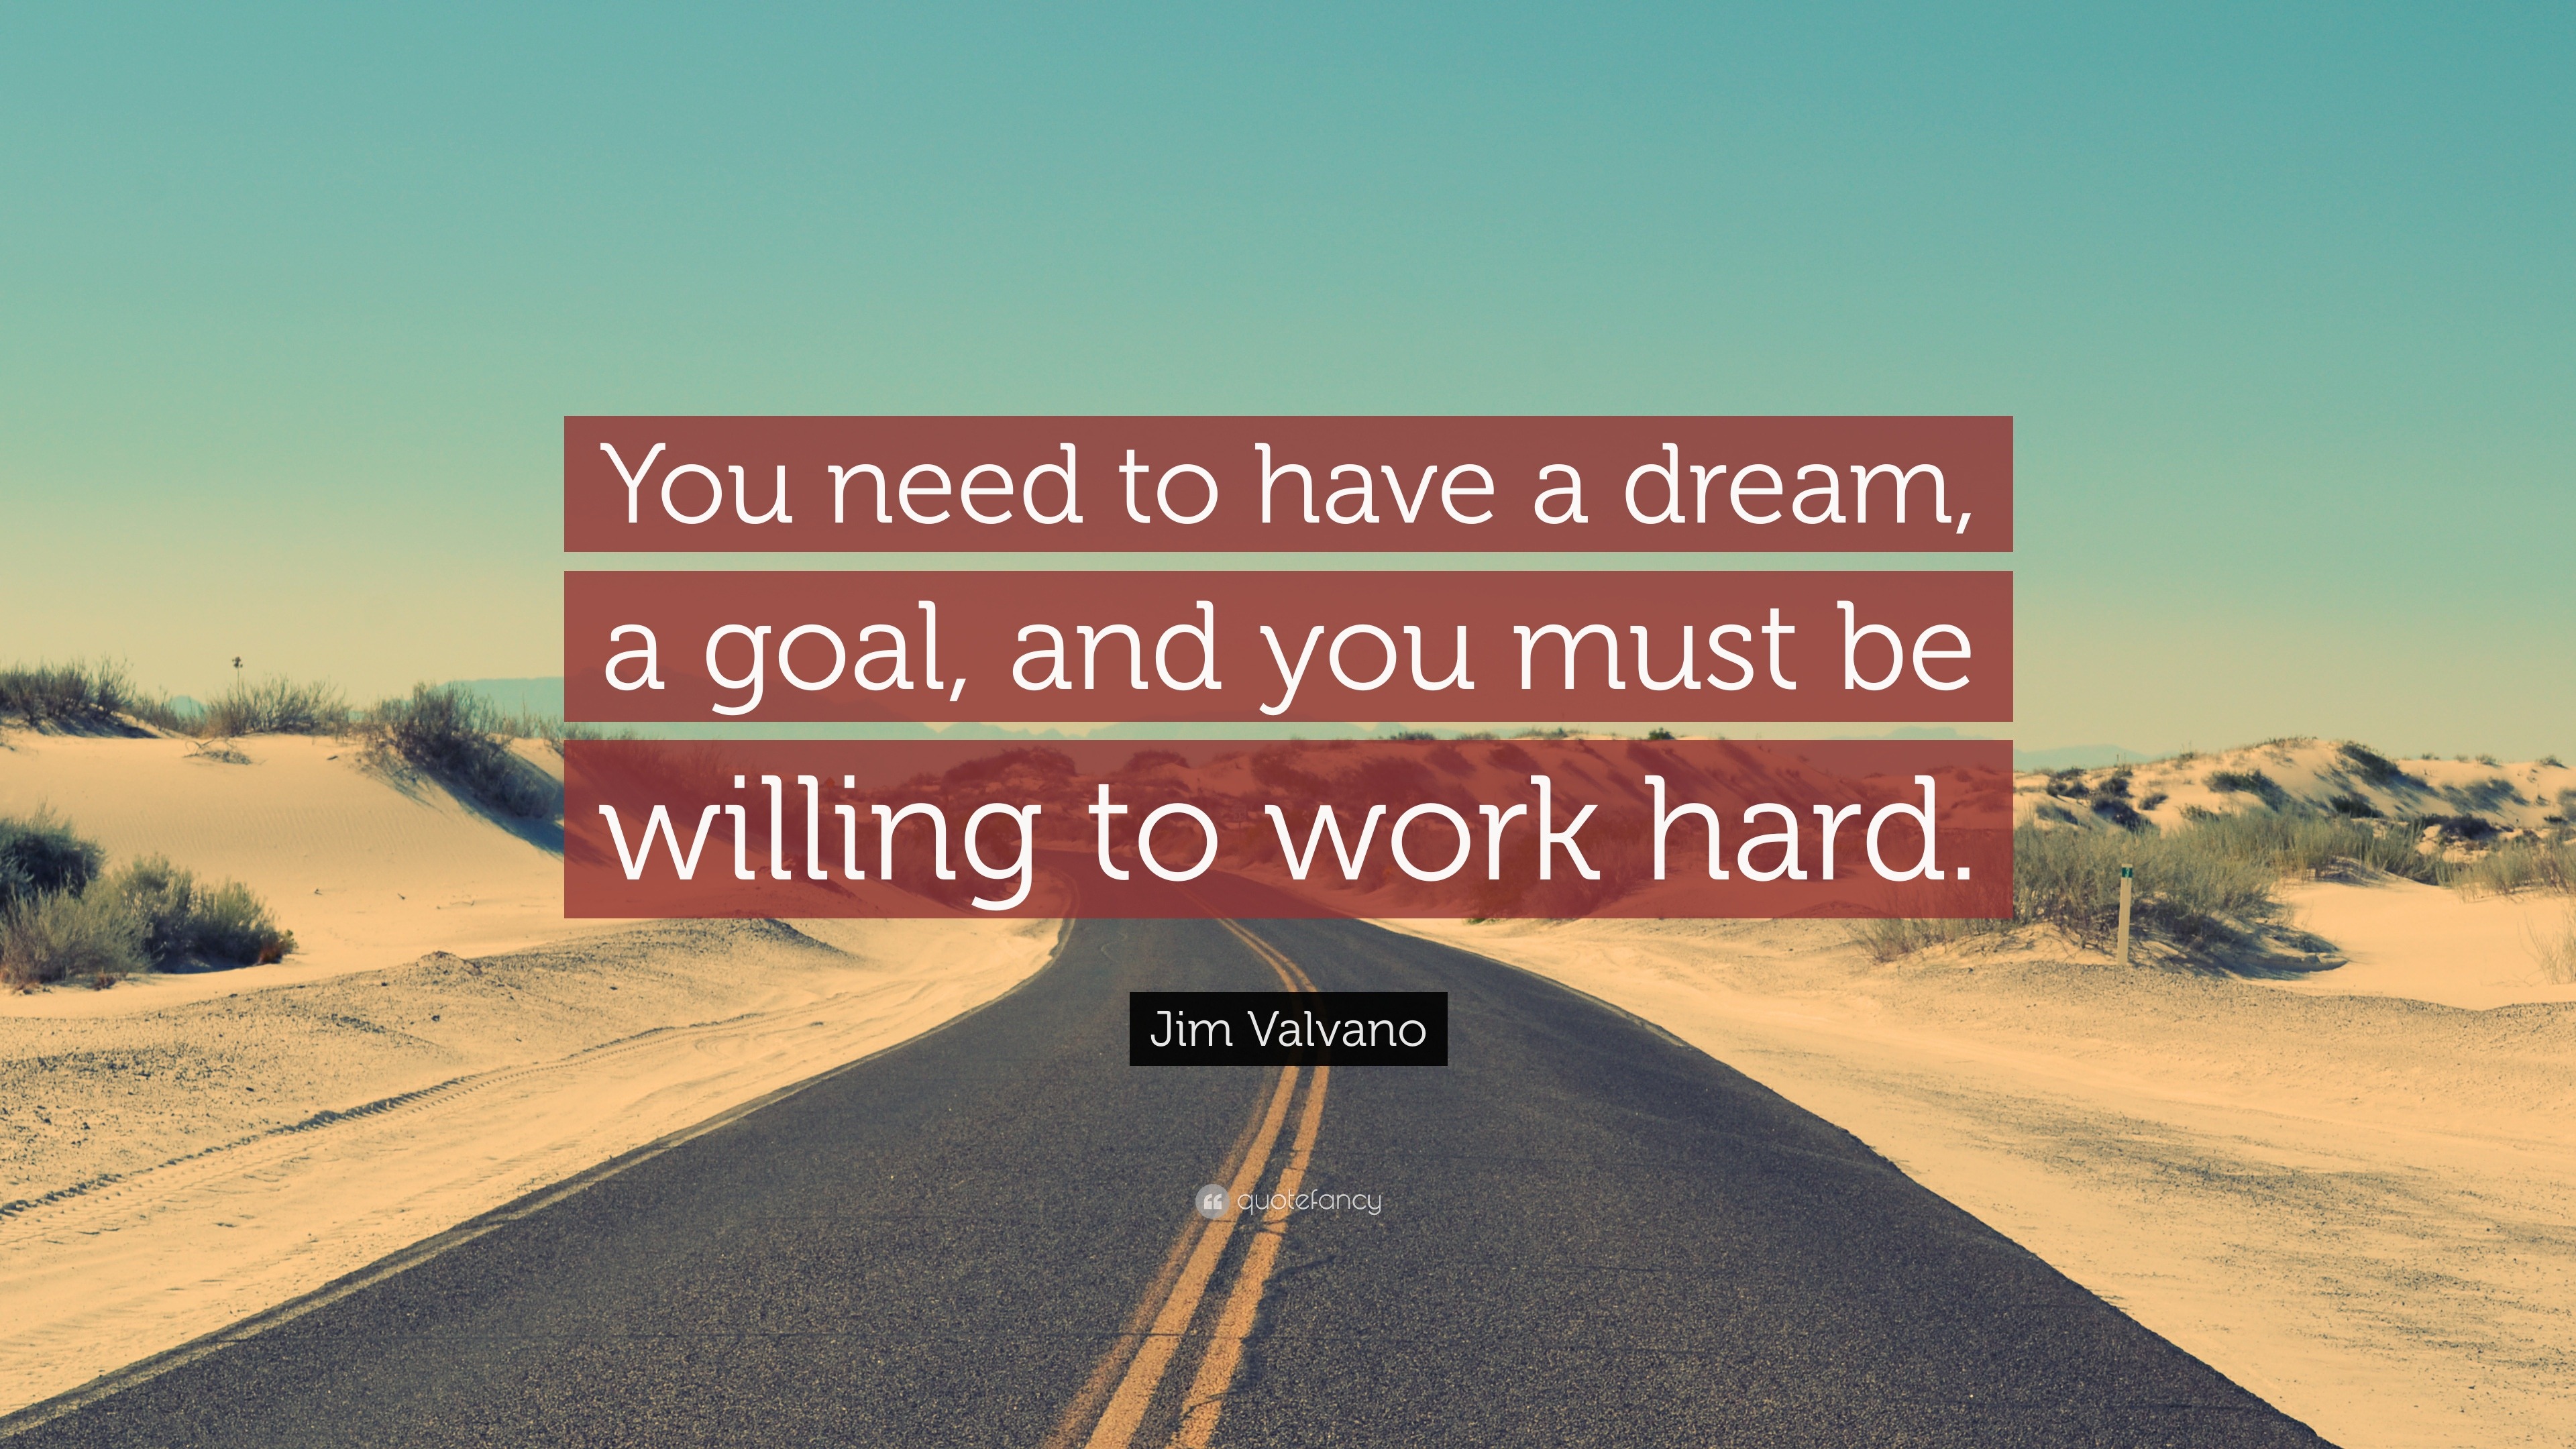 Jim Valvano Quote: “You need to have a dream, a goal, and you must be